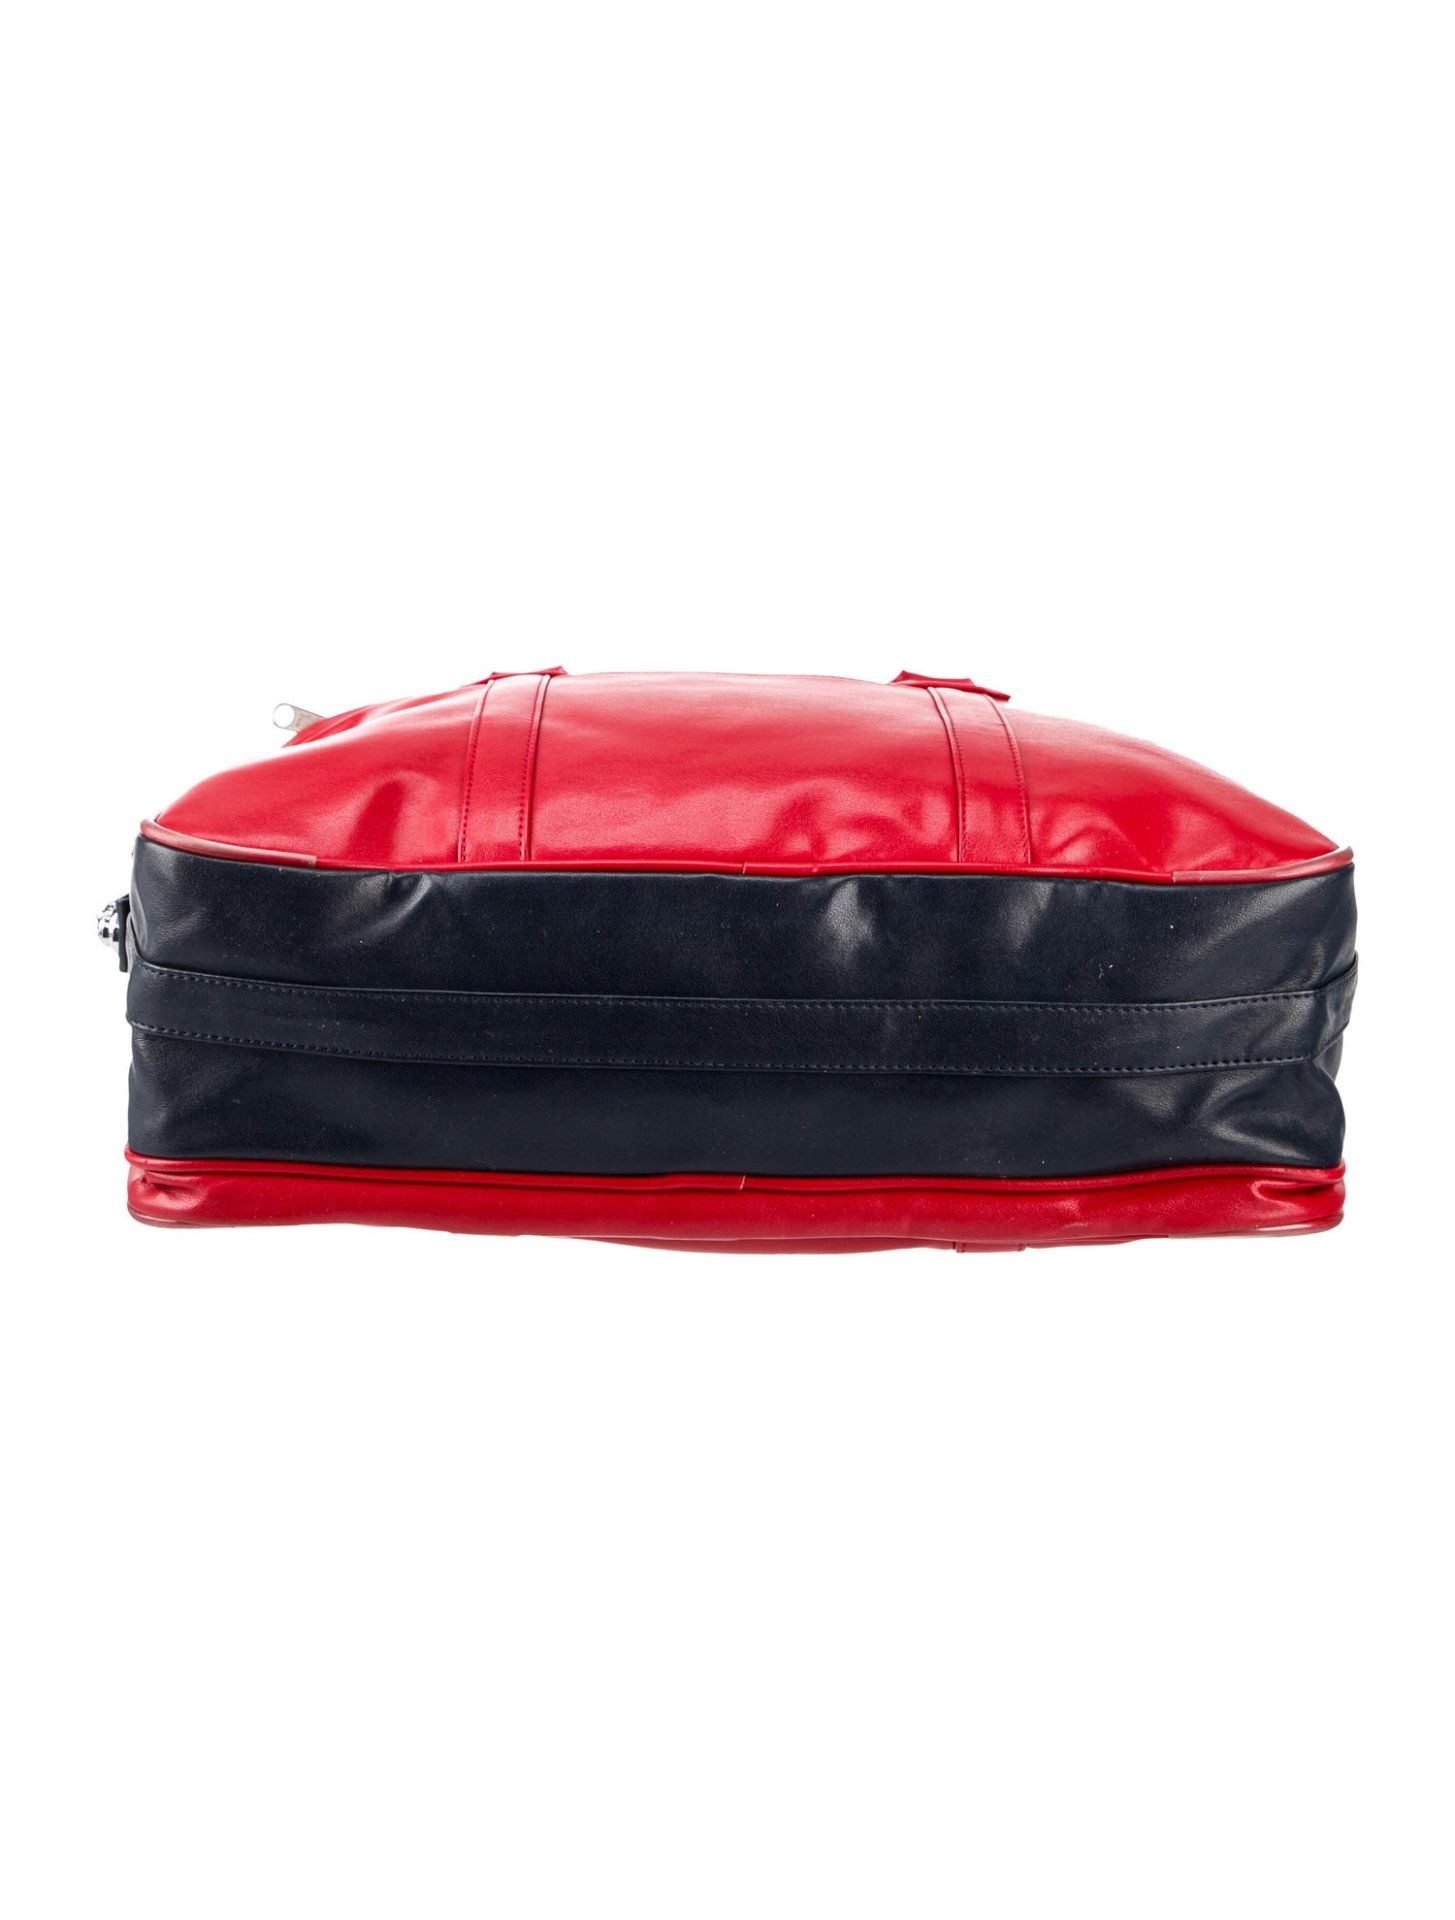 Comme Des GarÃ§ons Briefcase in Red Artificial Leather â€“ NEW â€“ RRP Â£175 ! - Image 8 of 9